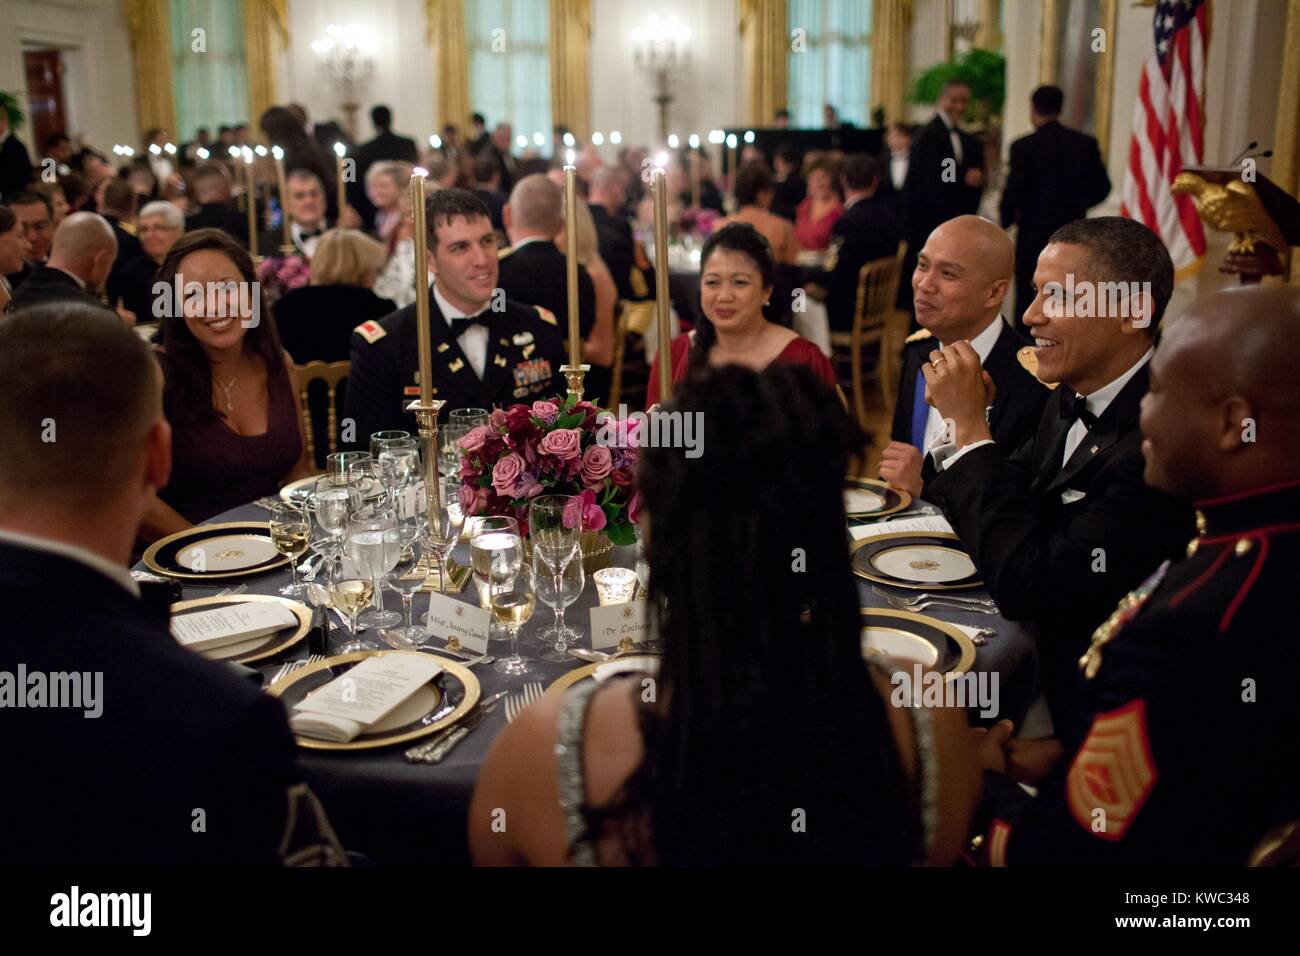 President Barack Obama's table at the Department of Defense dinner, Feb. 29, 2012. The dinner was held to honor members of the Armed Forces who served in Iraq and Afghanistan, East Room of the White House (BSLOC 2015 13 207) Stock Photo